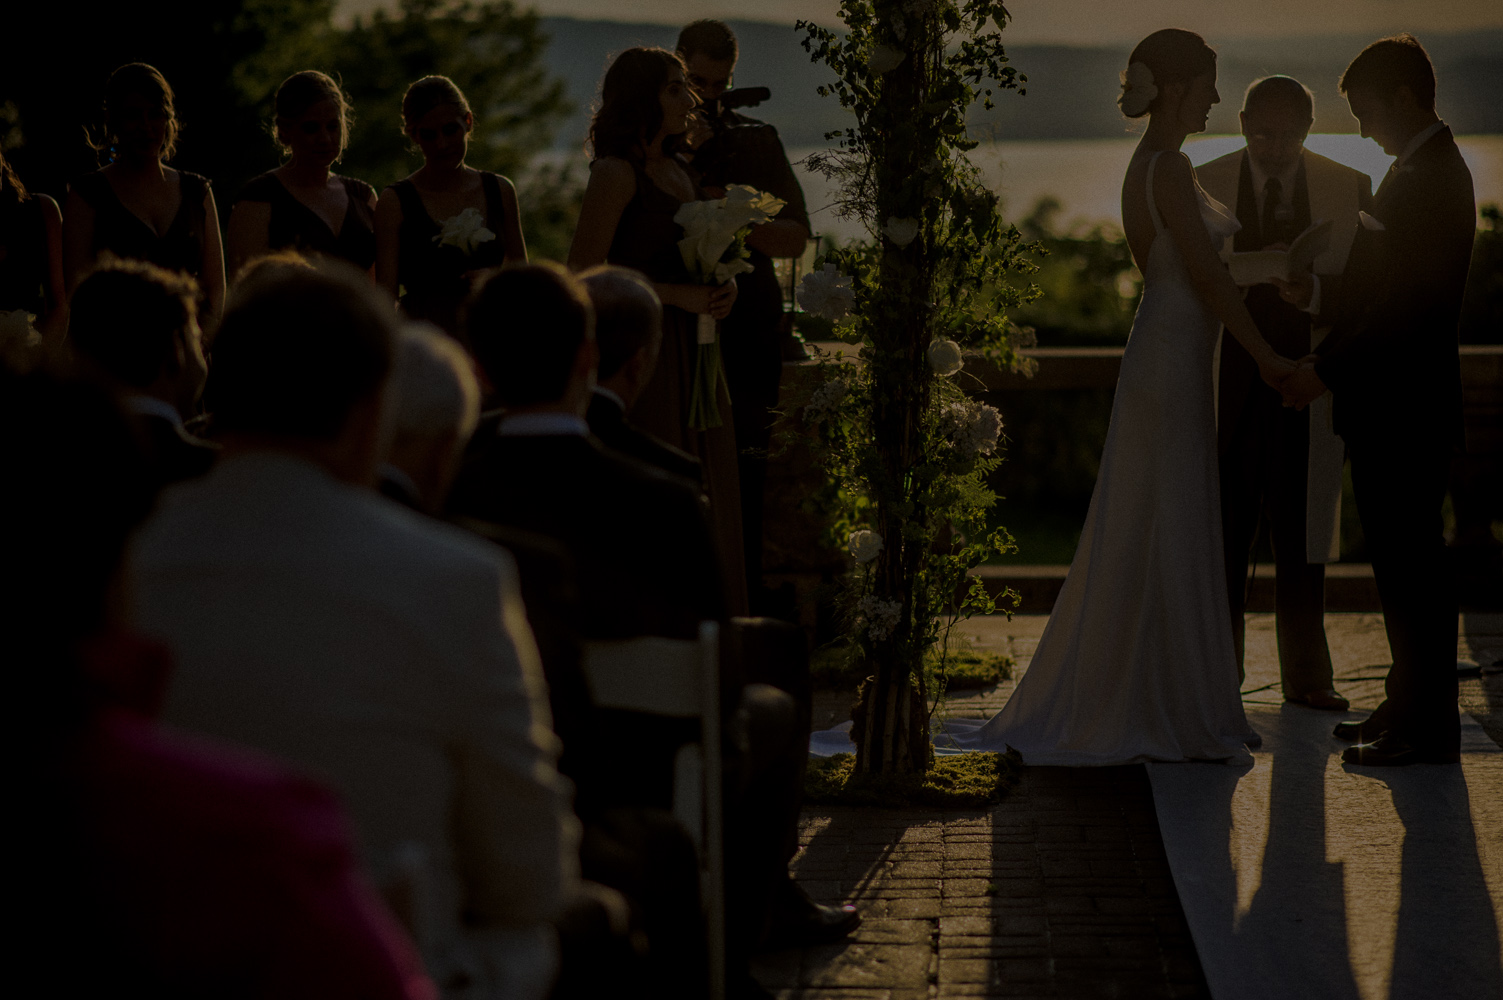 late afternoon outdoor wedding ceremony